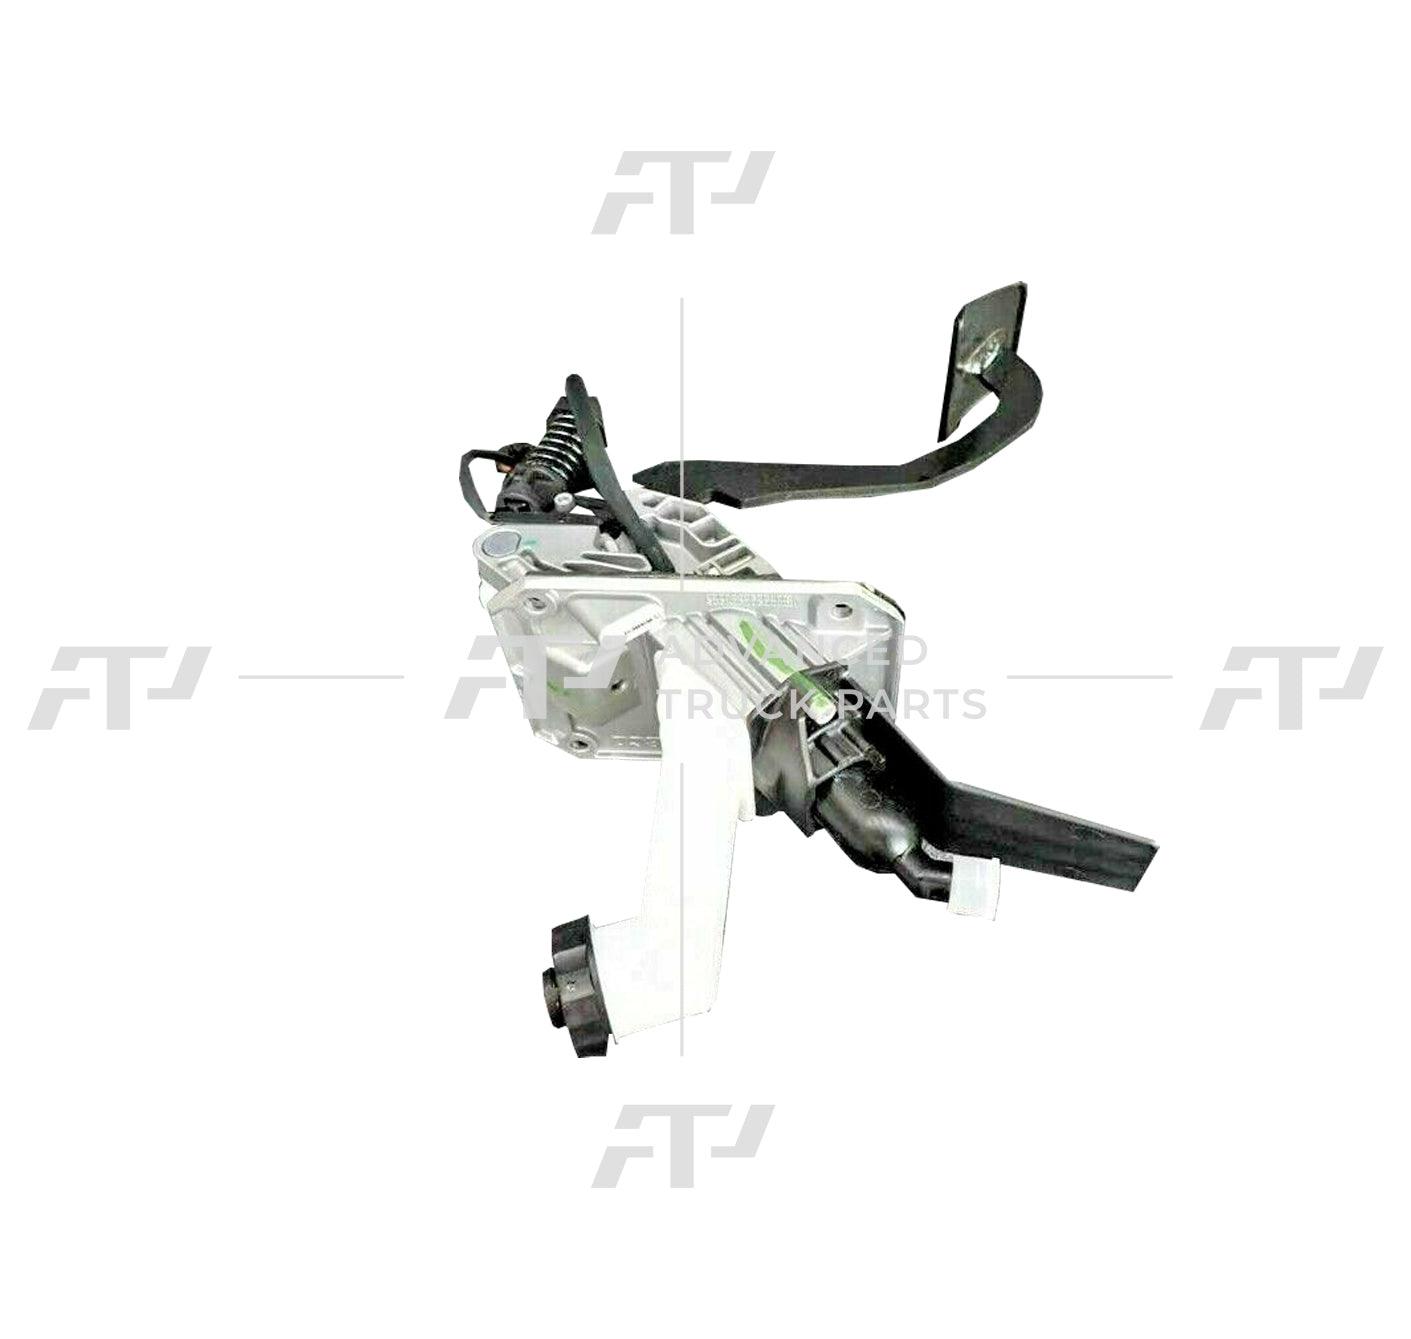 S9650012080 Genuine Wabco Hydraulic Clutch Pedal Assembly - ADVANCED TRUCK PARTS